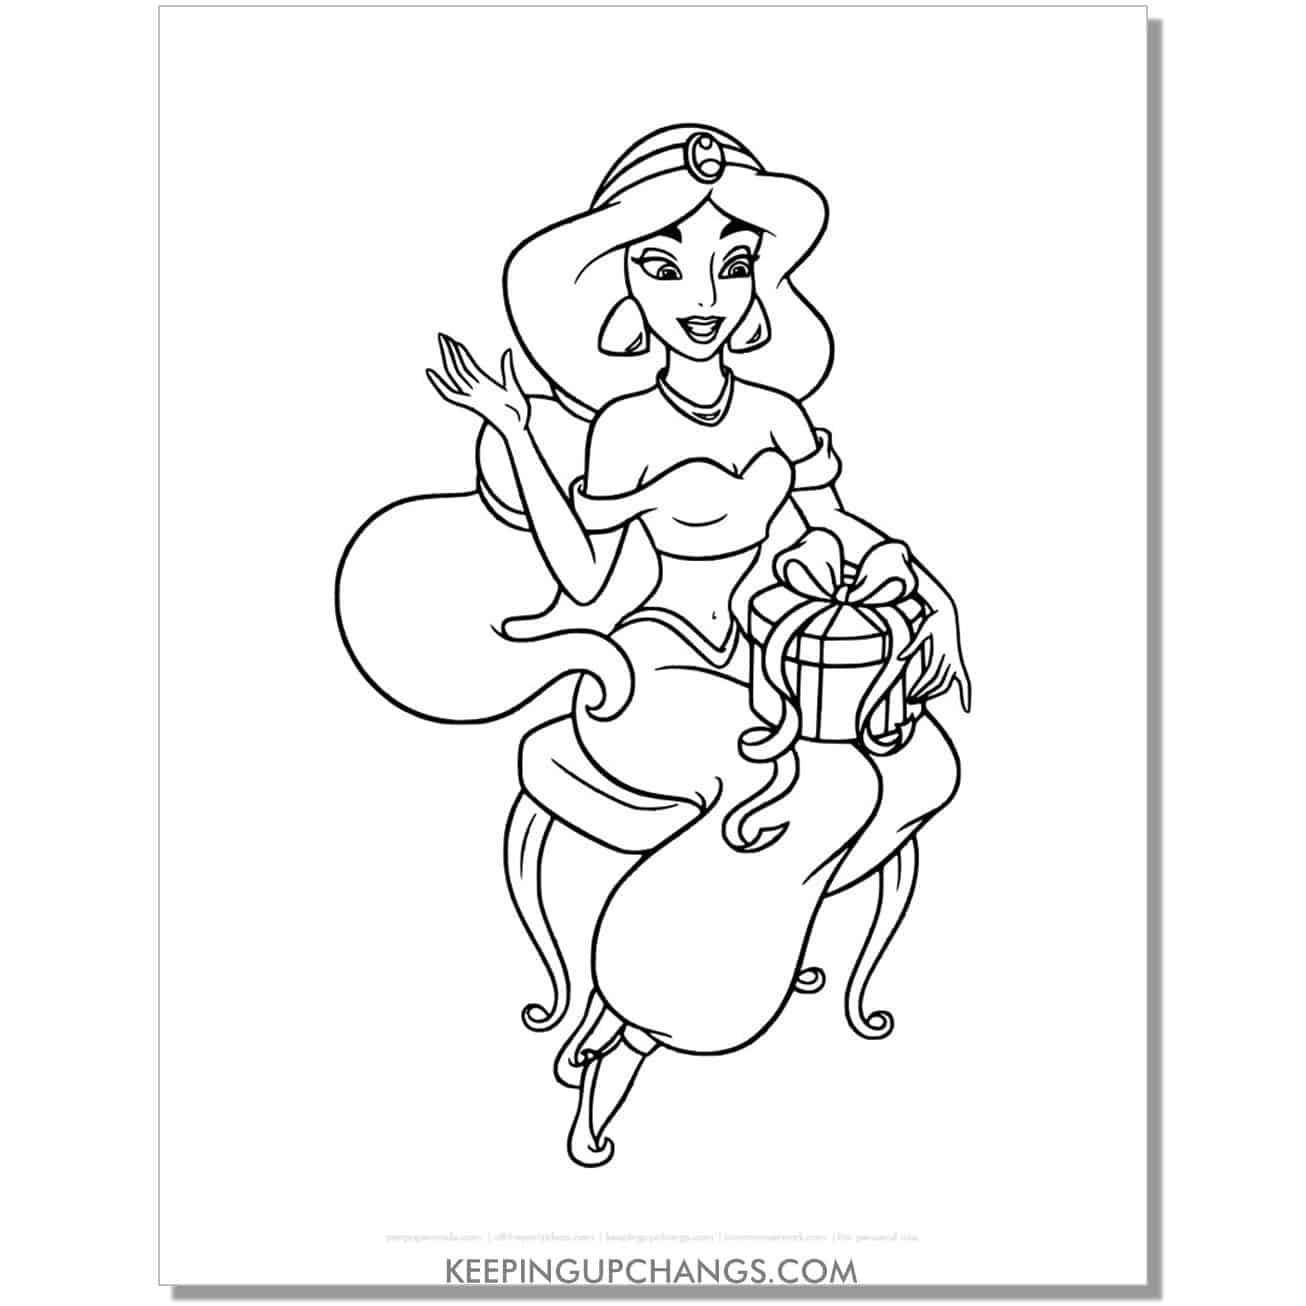 jasmine opening present coloring page, sheet.